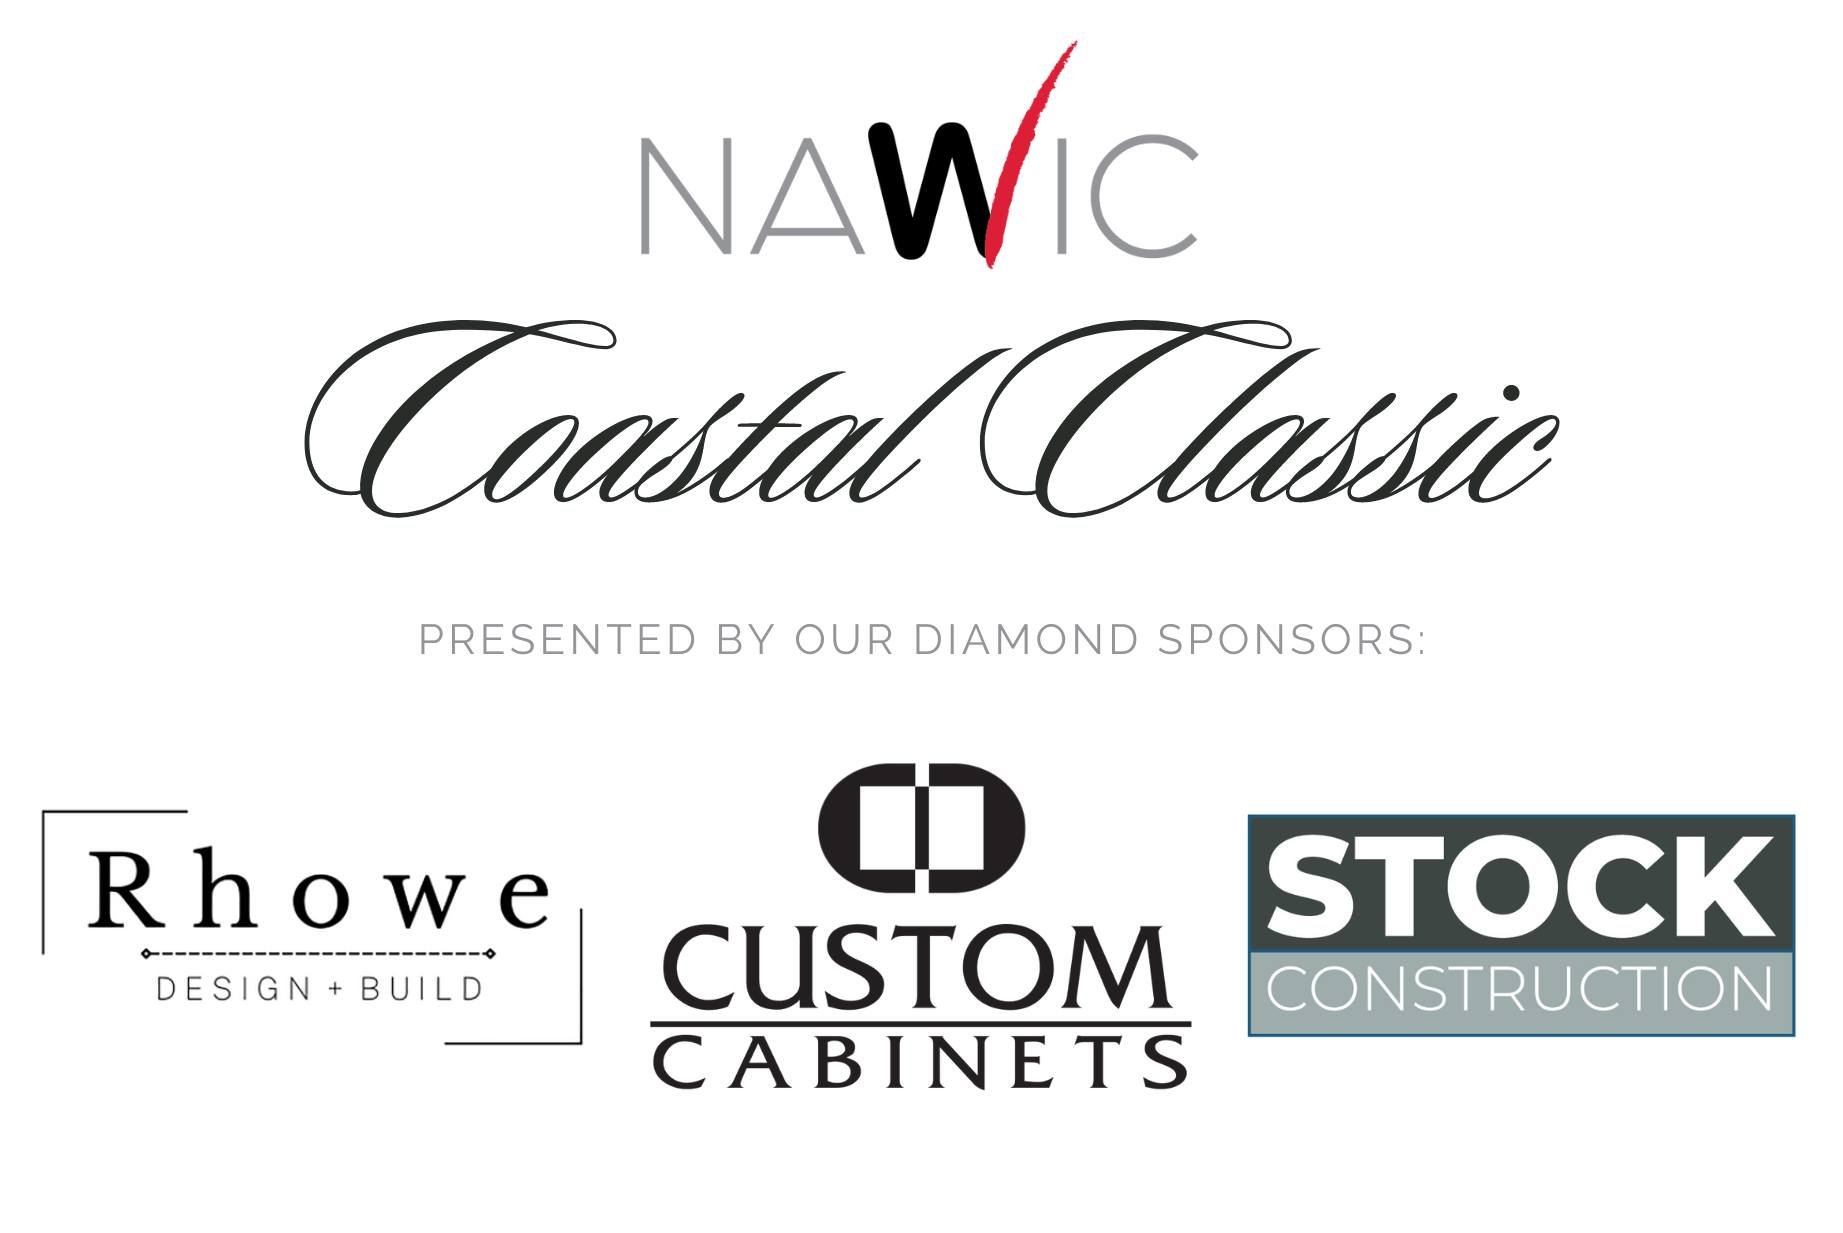 Today is the day!  Thanks again to ALL our sponsors and particularly our Diamond Sponsors who helped make our first annual NAWIC Coastal Classic a success! Thanks again @Rhowe Design + Build, @Custom Cabinets by Williamson Millworks Inc. and Stock Co